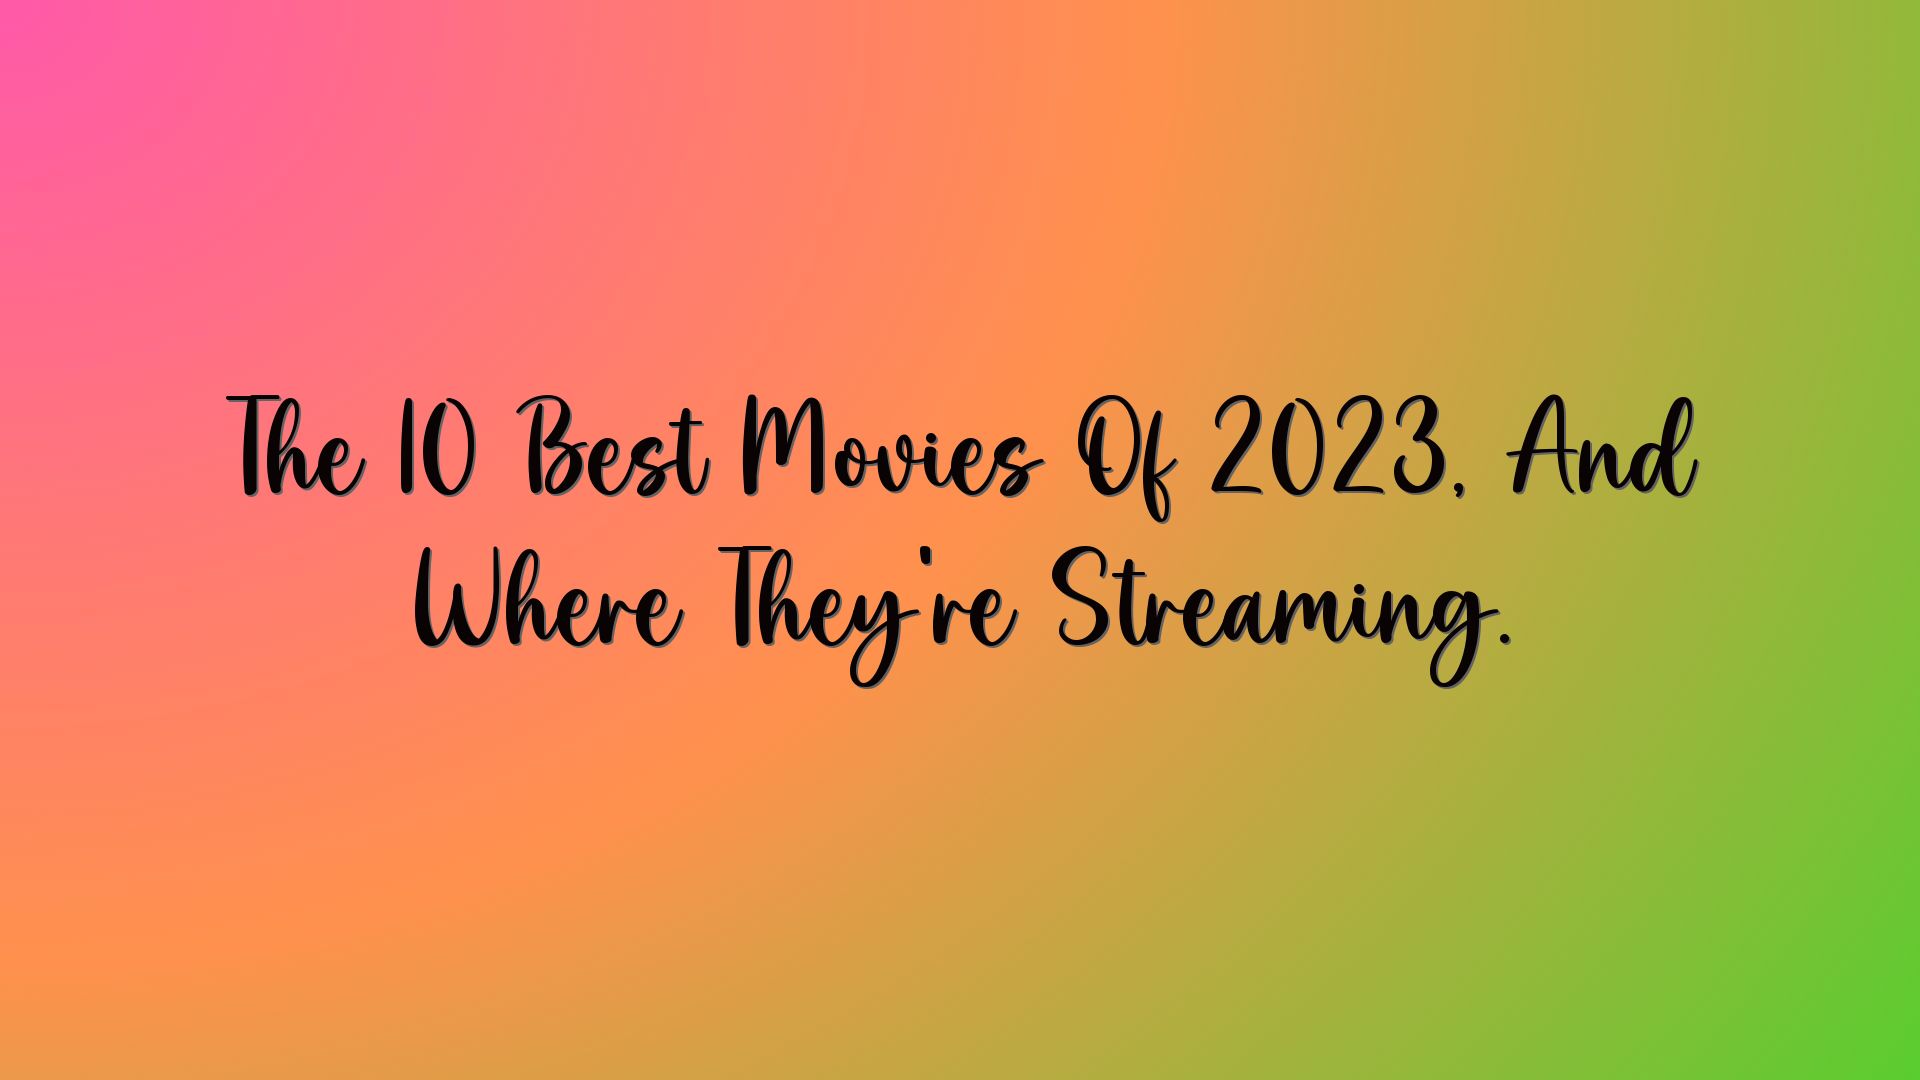 The 10 Best Movies Of 2023, And Where They’re Streaming.